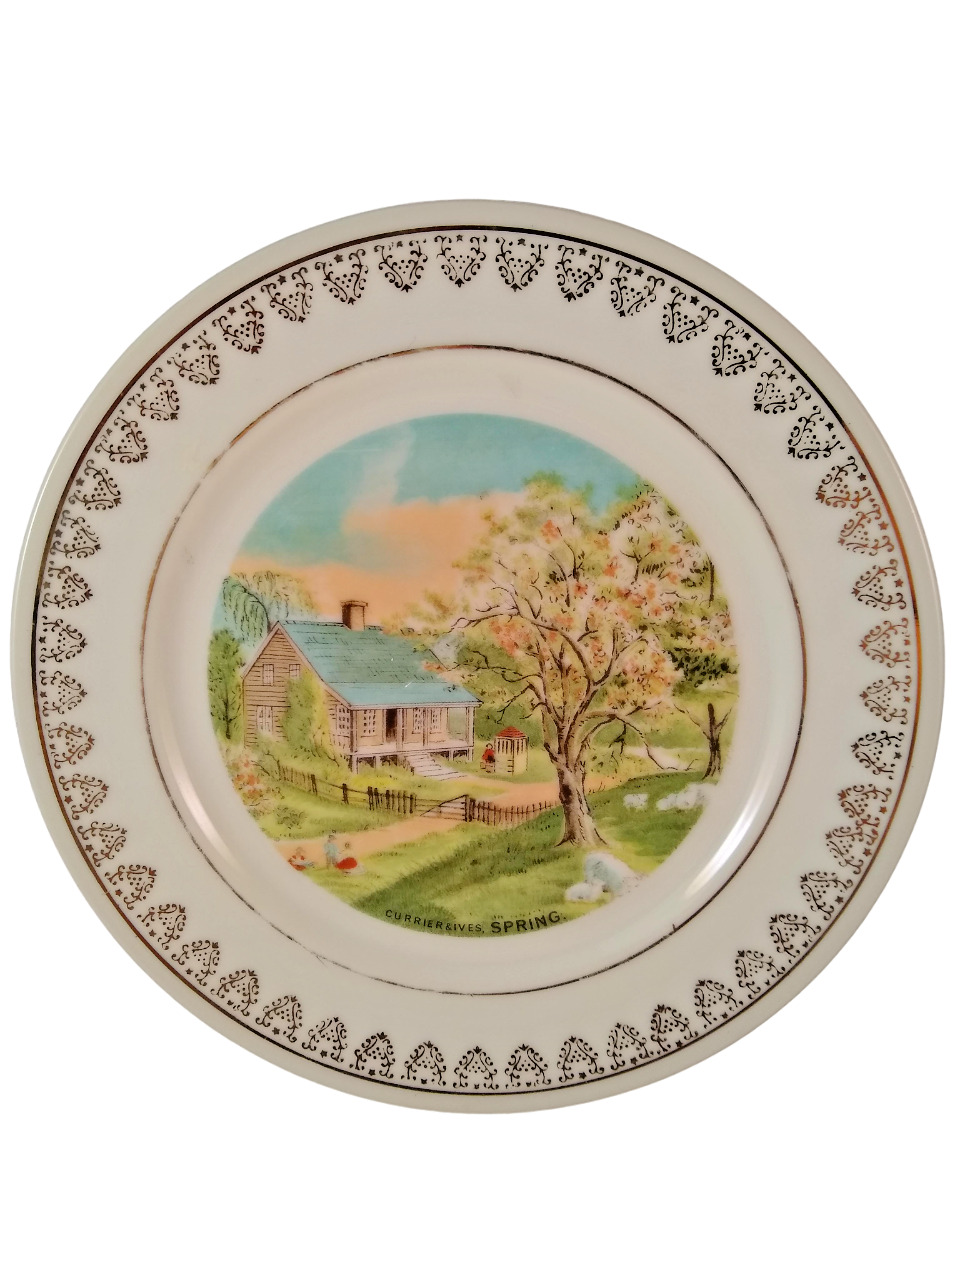 Currier and Ives Decorative Plate - Spring -  1982 Limited Edition